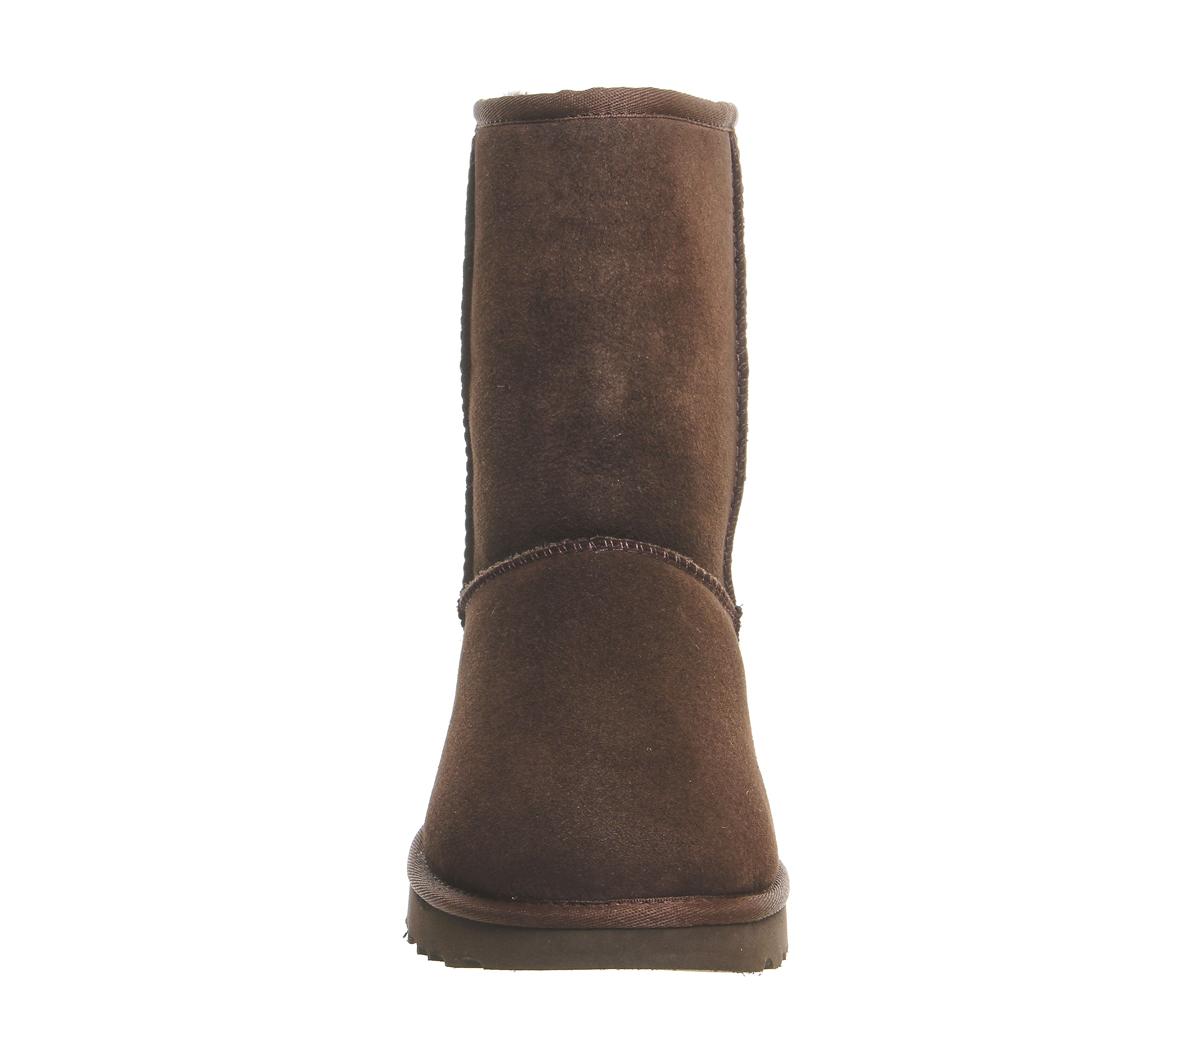 UGG Classic Short II Boots Chocolate Suede - Ankle Boots